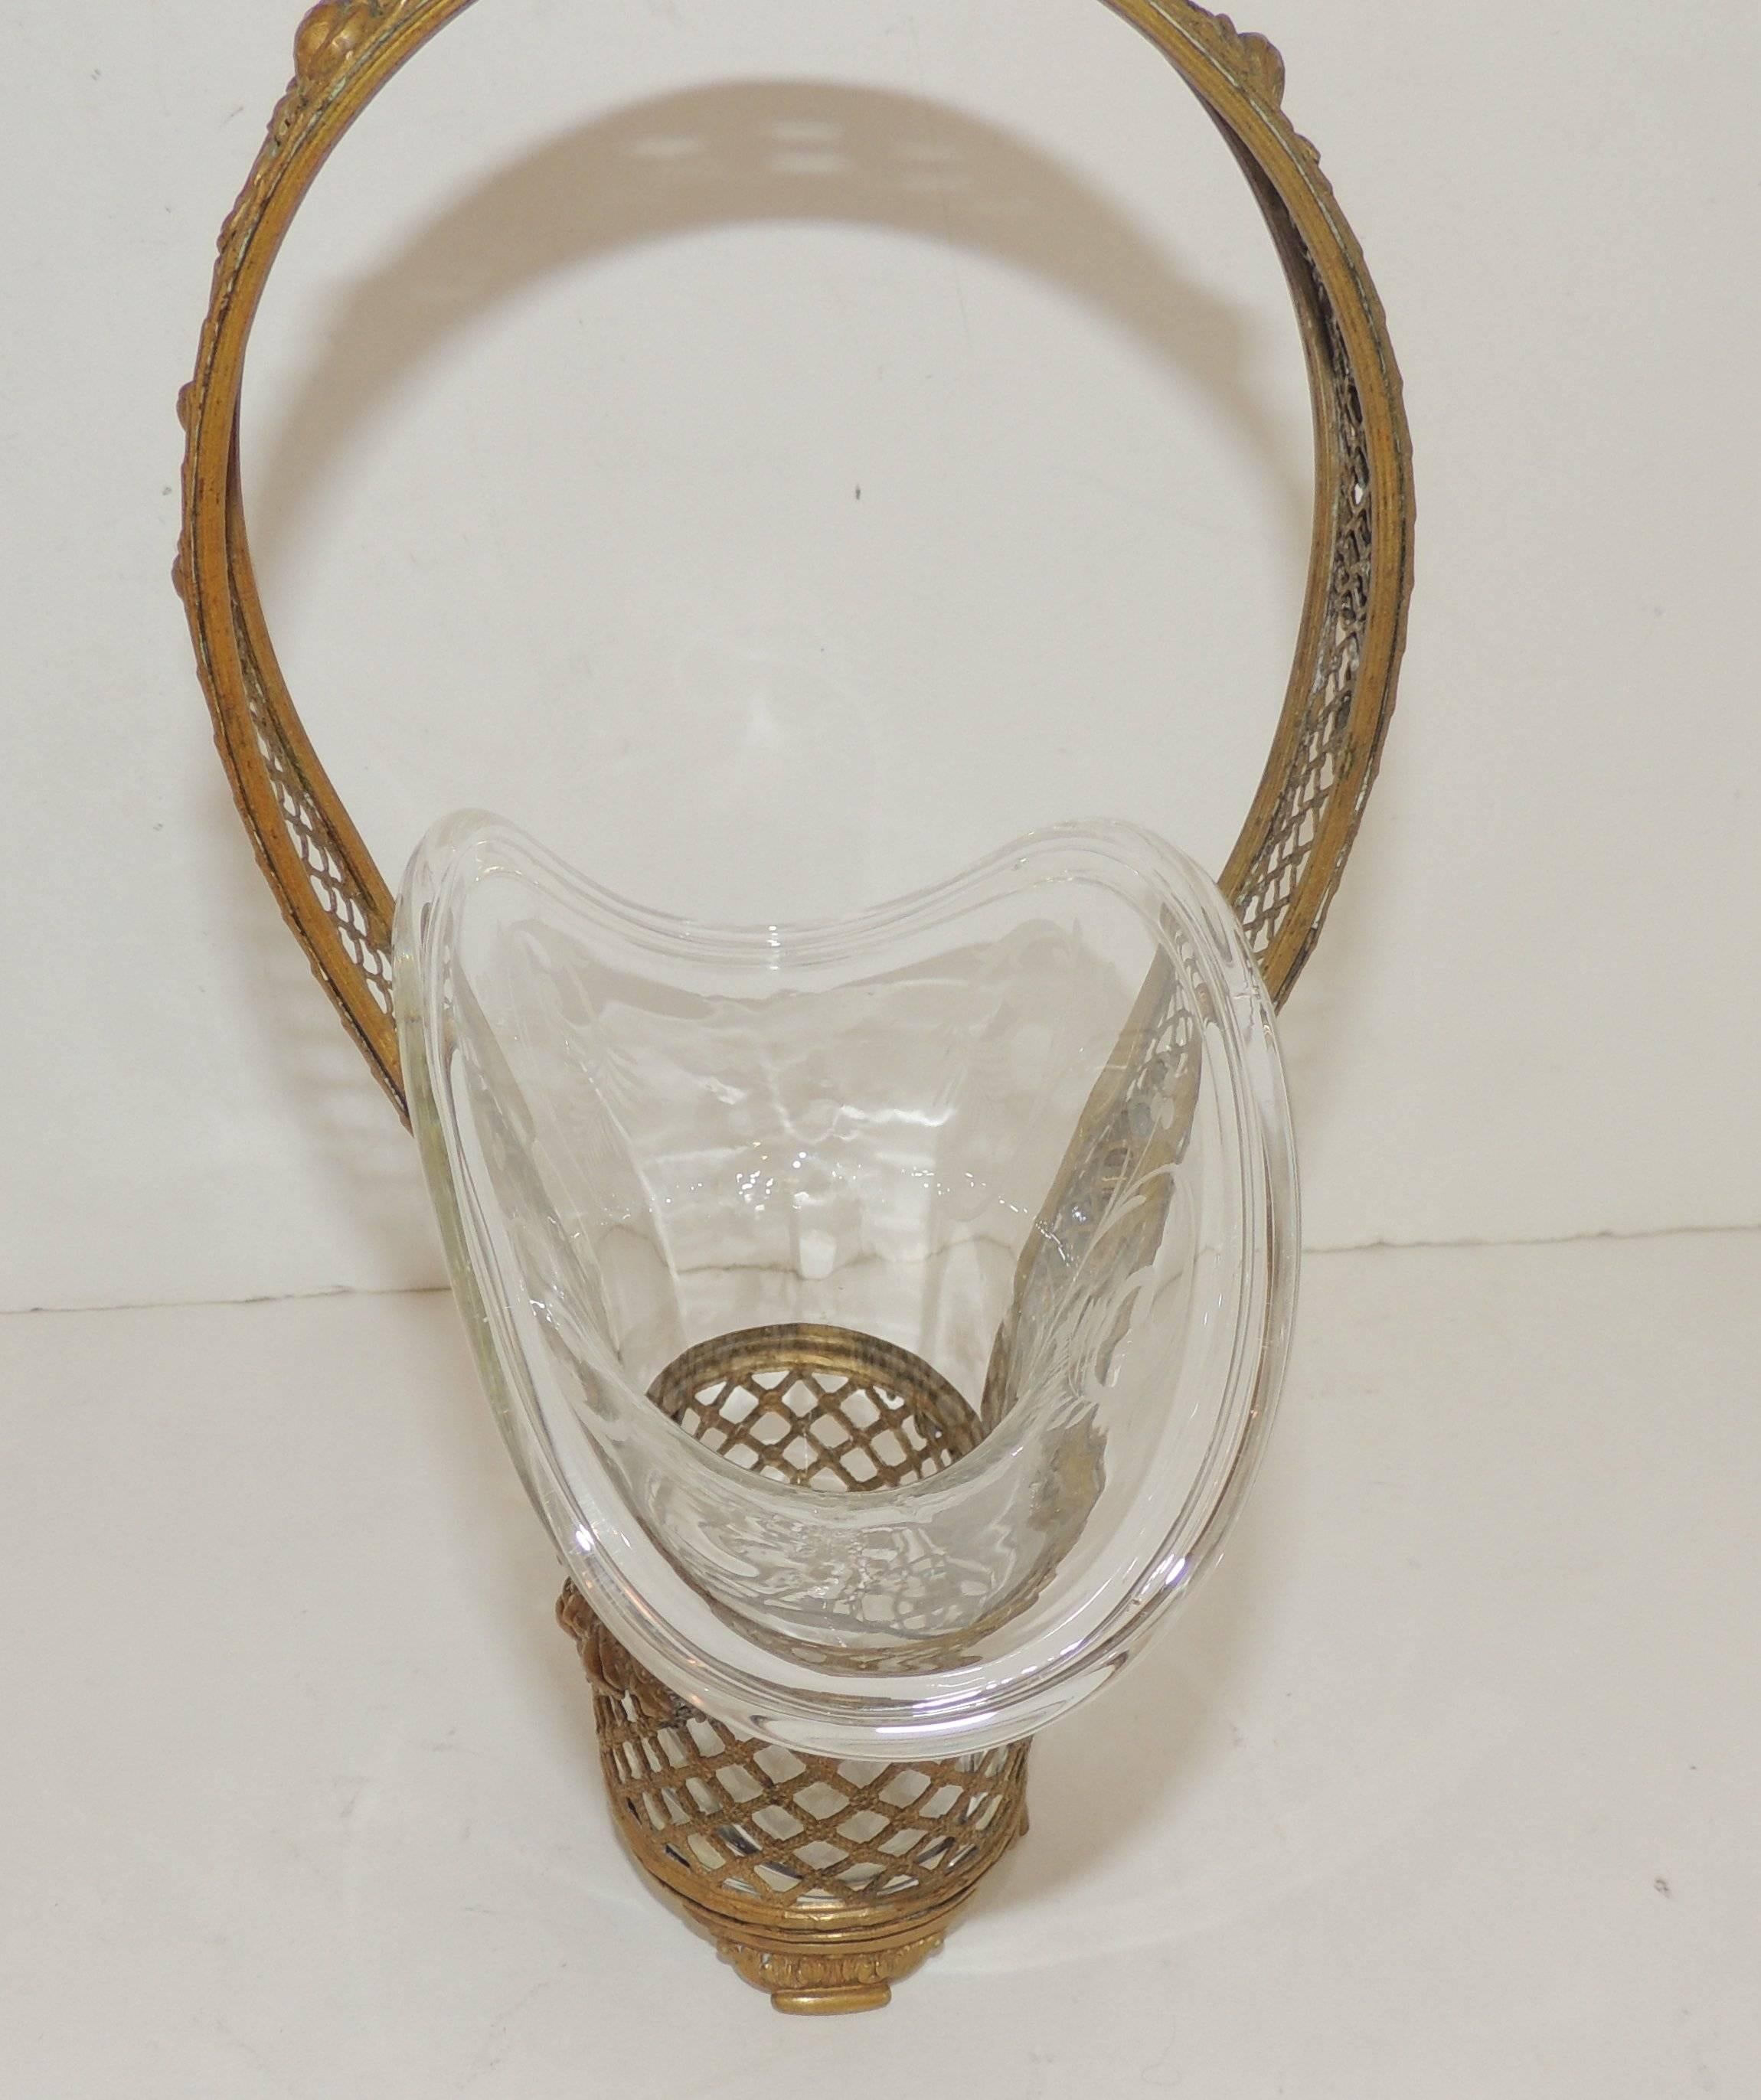 Wonderful French Gilt Bronze Roses Basket Etched Crystal Glass Bowl Centerpiece For Sale 1